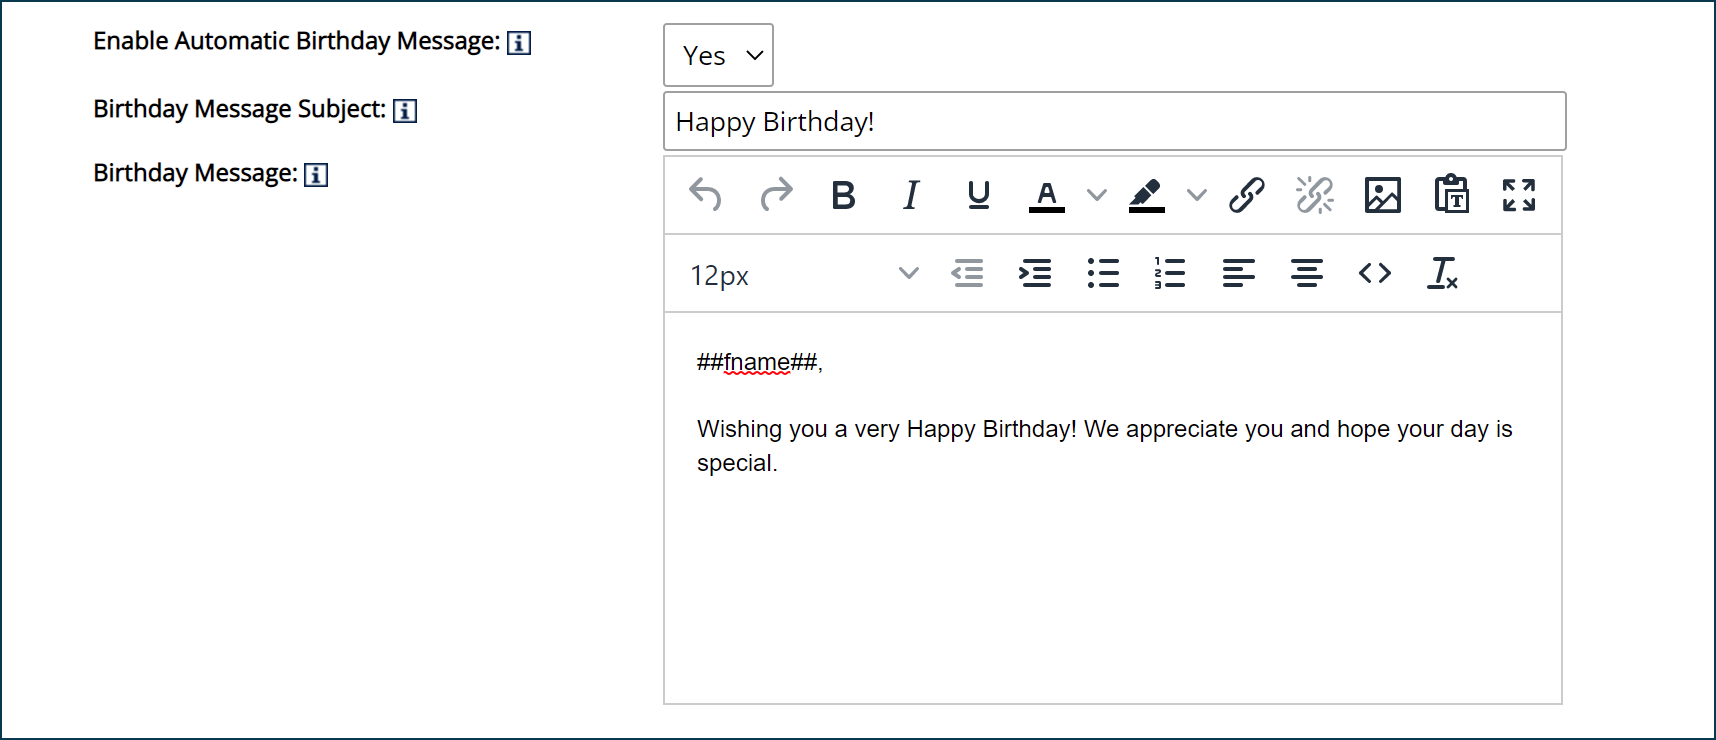 Auto_Bday_Email_-_KBA_image.png